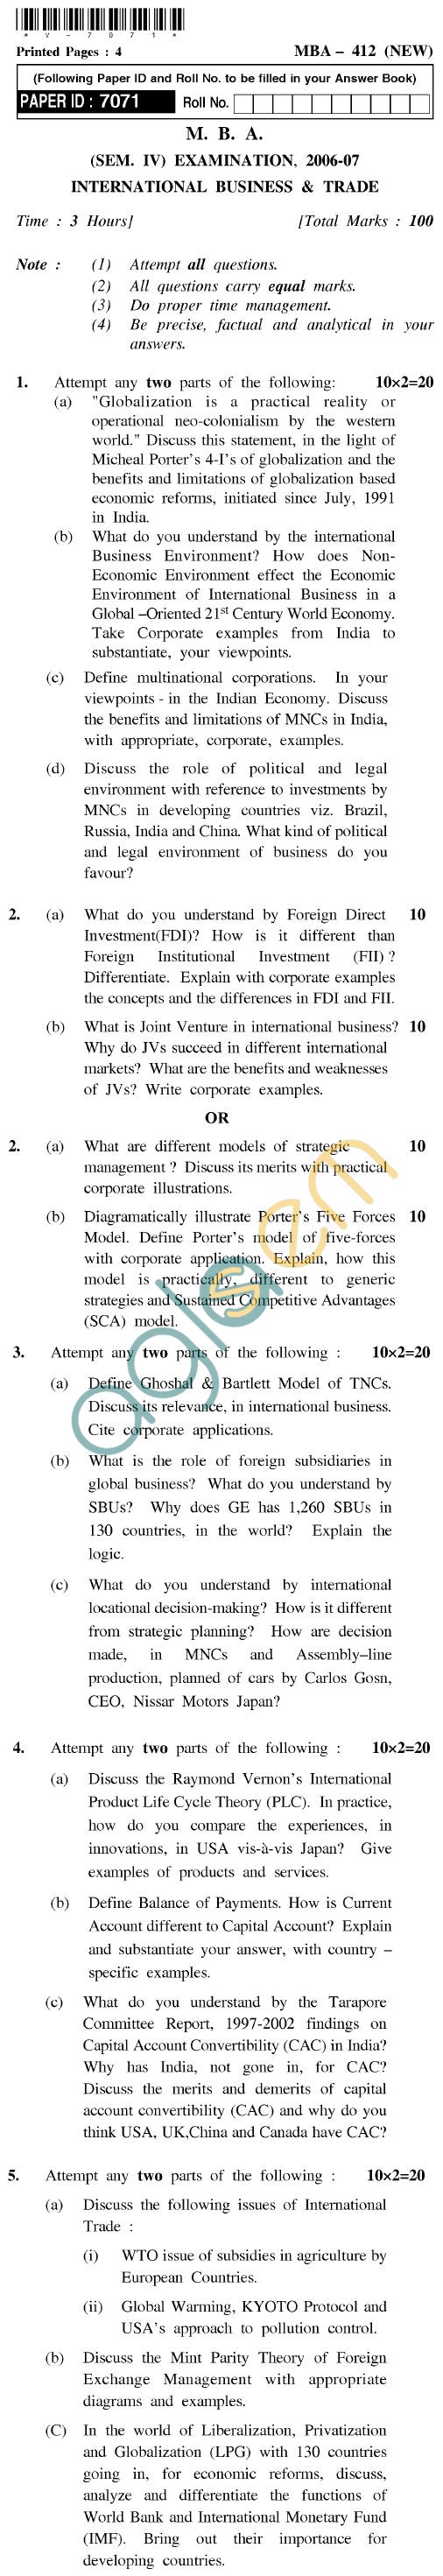 UPTU MBA Question Papers - MBA-412 (New)-International Business and Trade